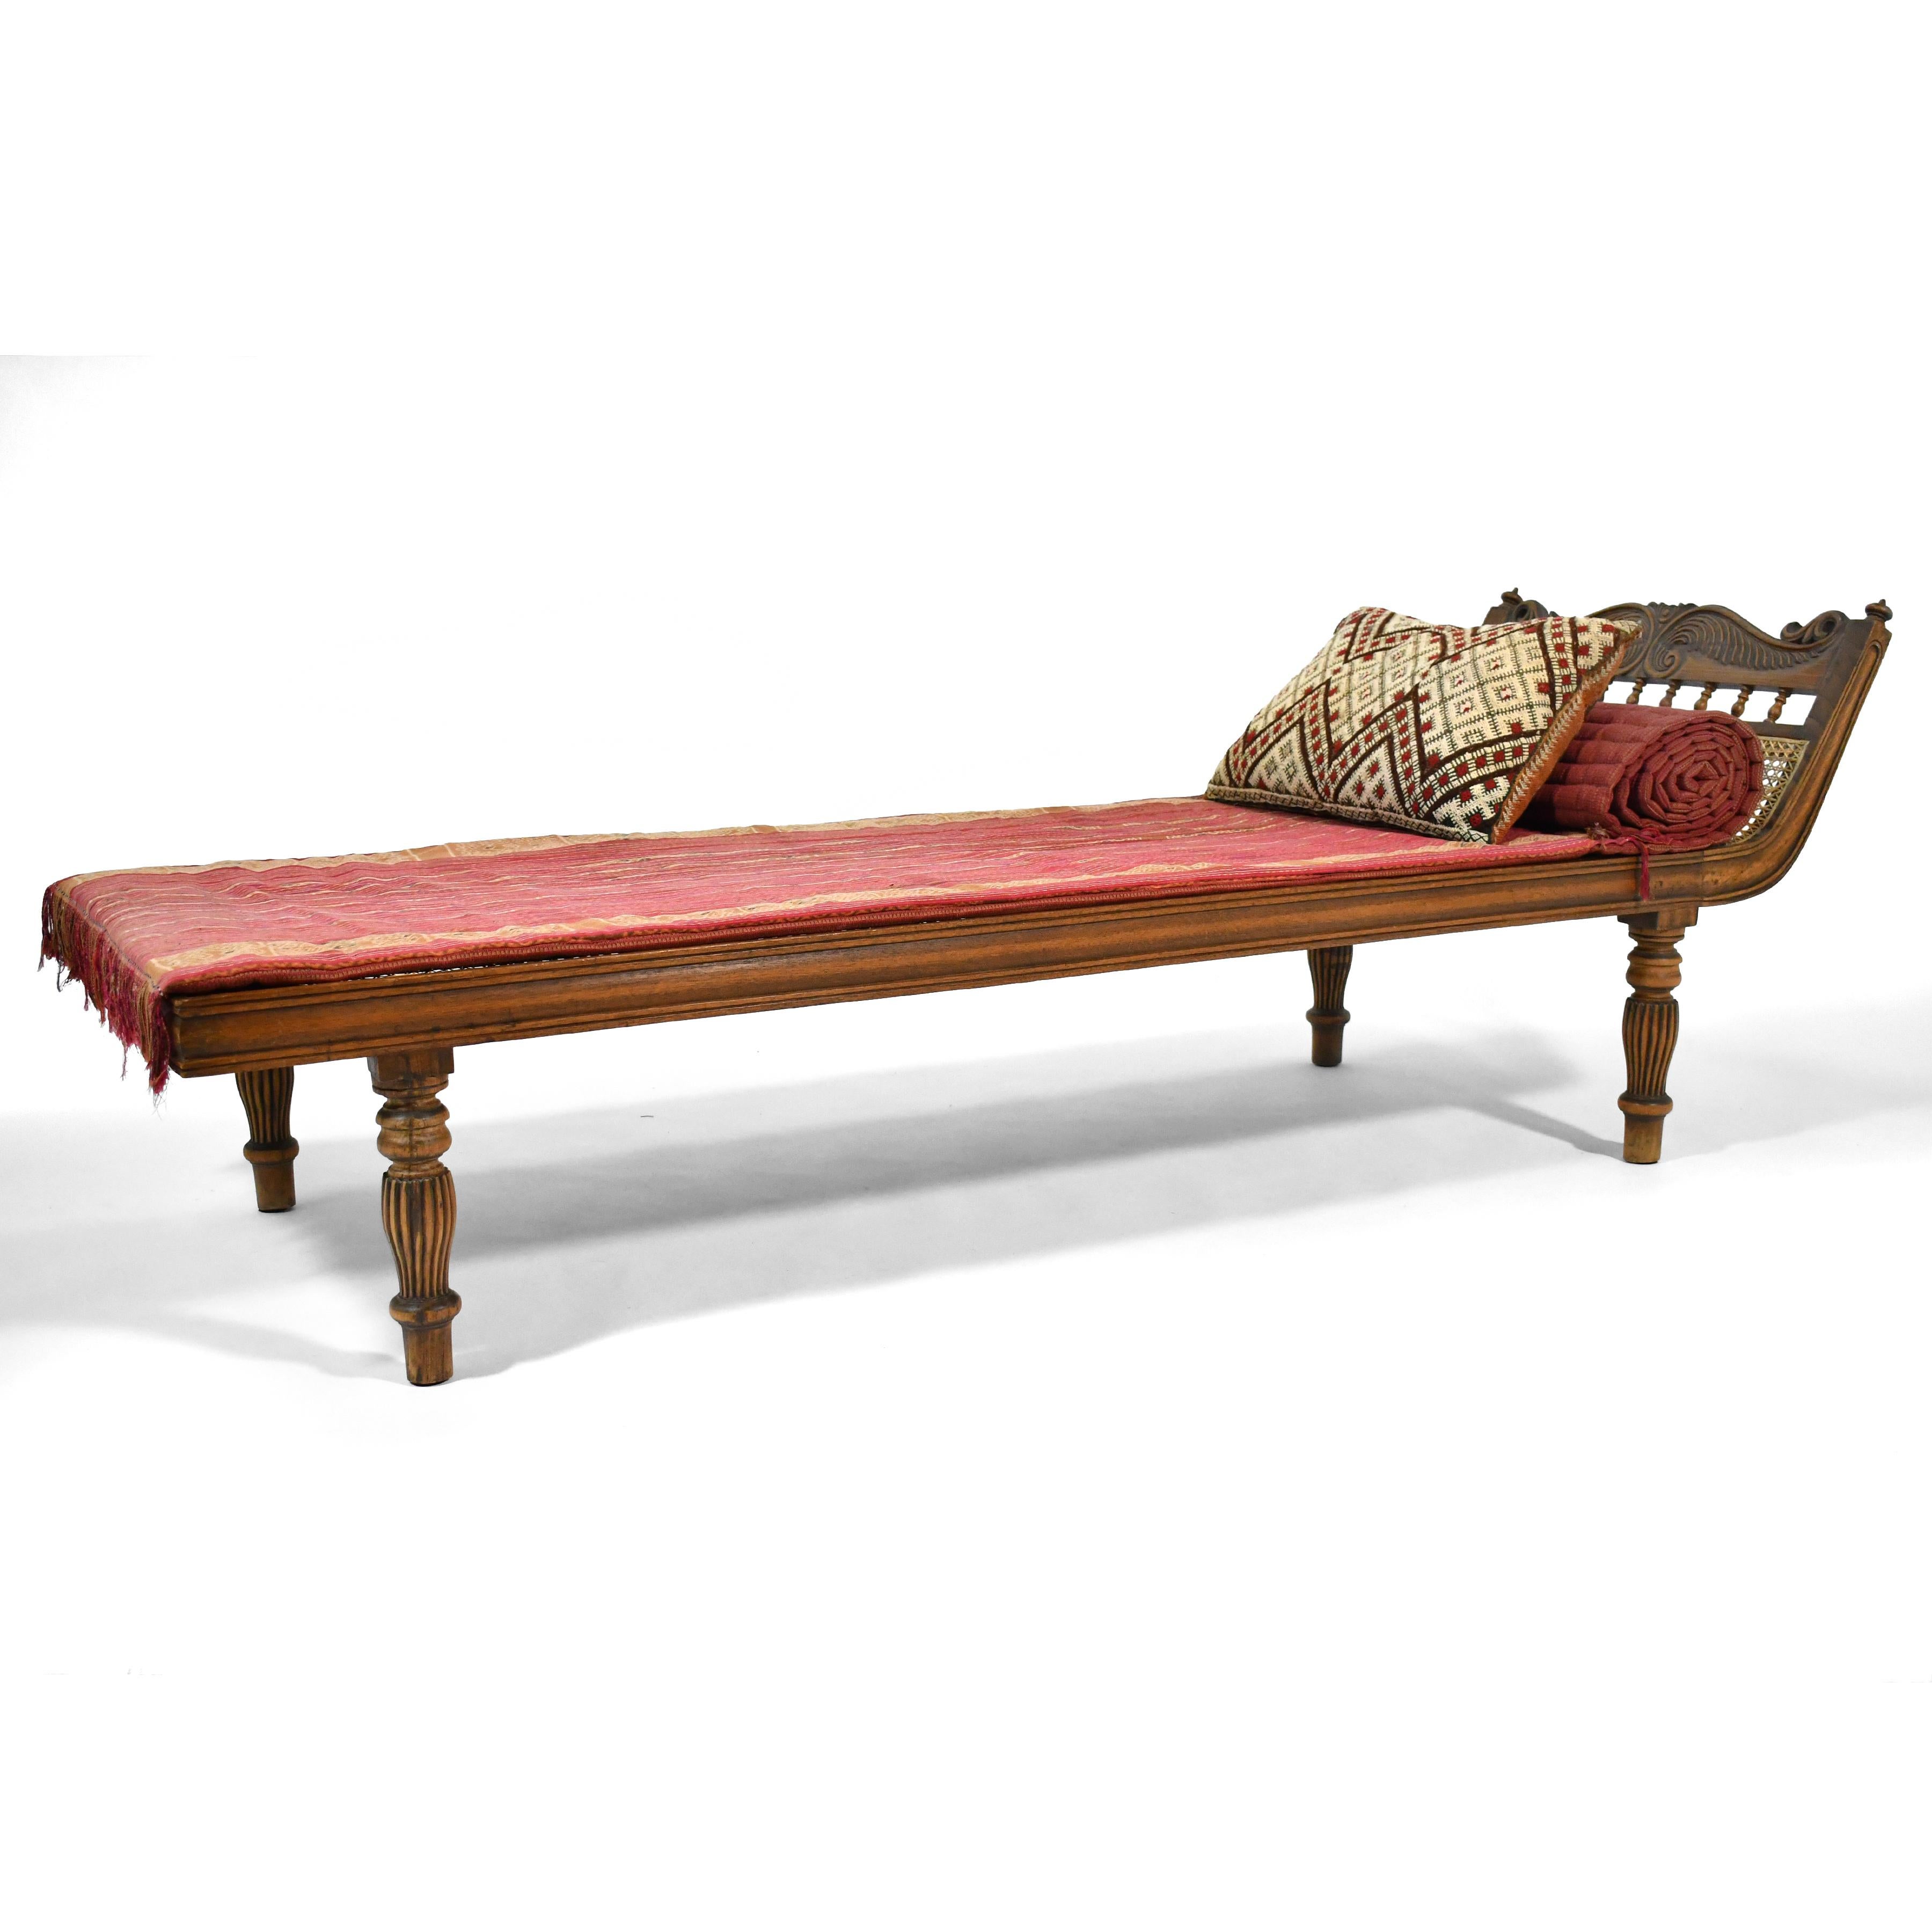 20th Century Teak and Cane Colonial Chaise Lounge For Sale